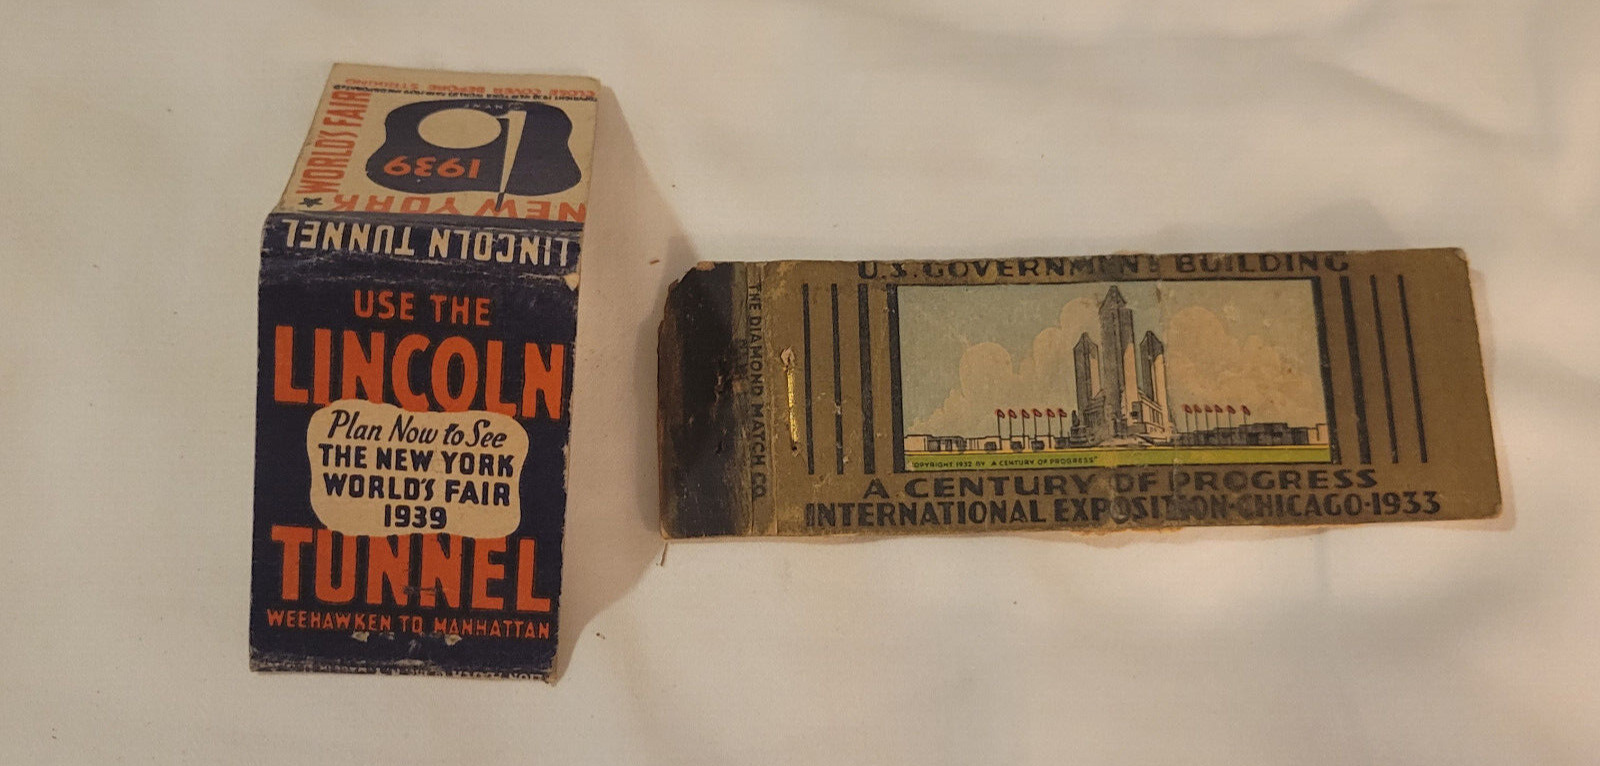 Vintage 1939 World's Fair and 1933 Century of Progress Matchbook Covers